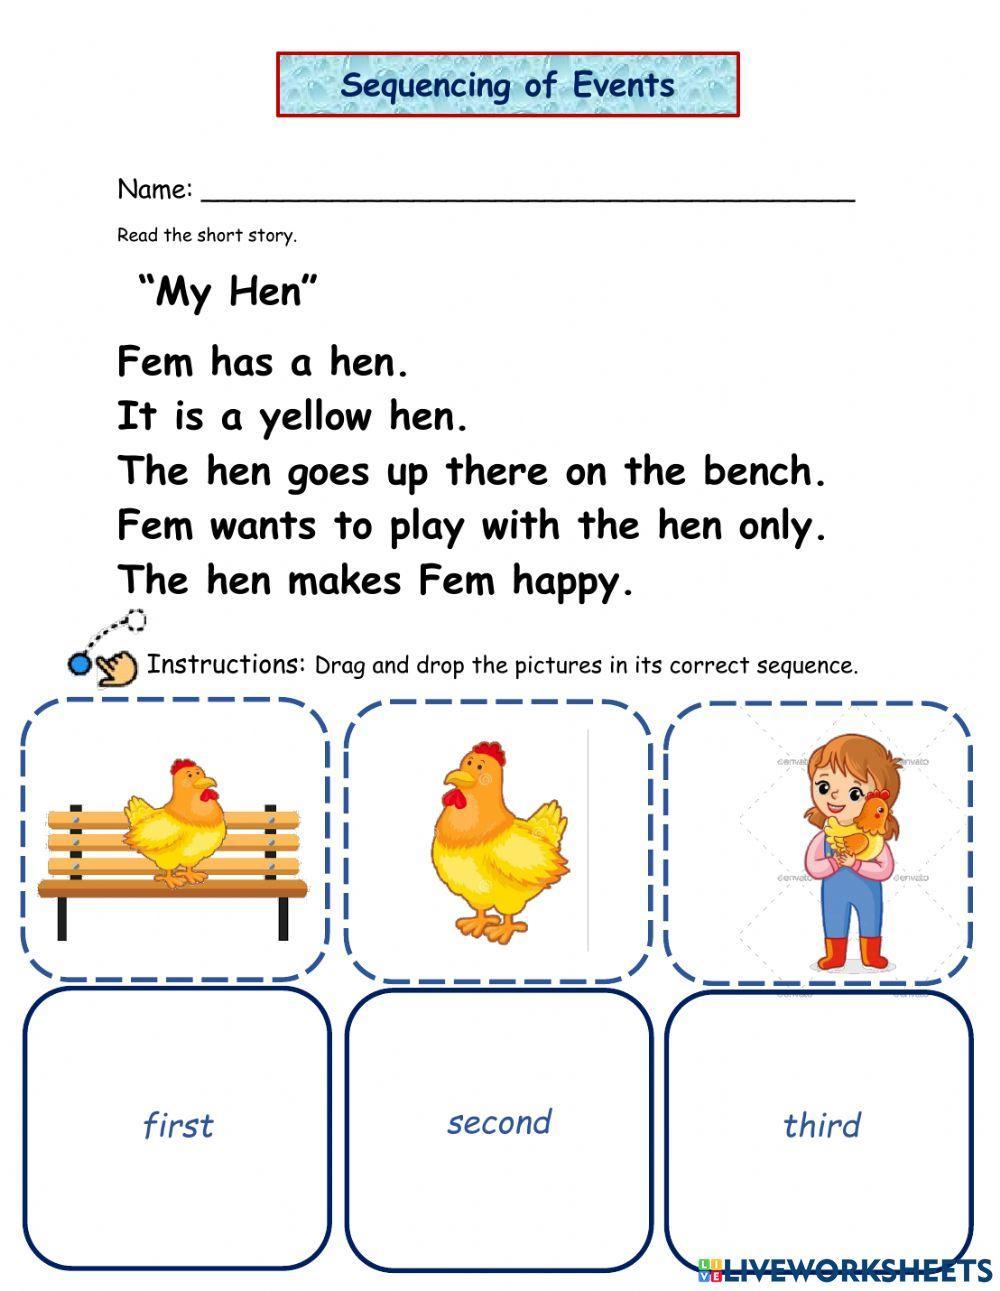 Day 1-Sequencing of Events-My Hen